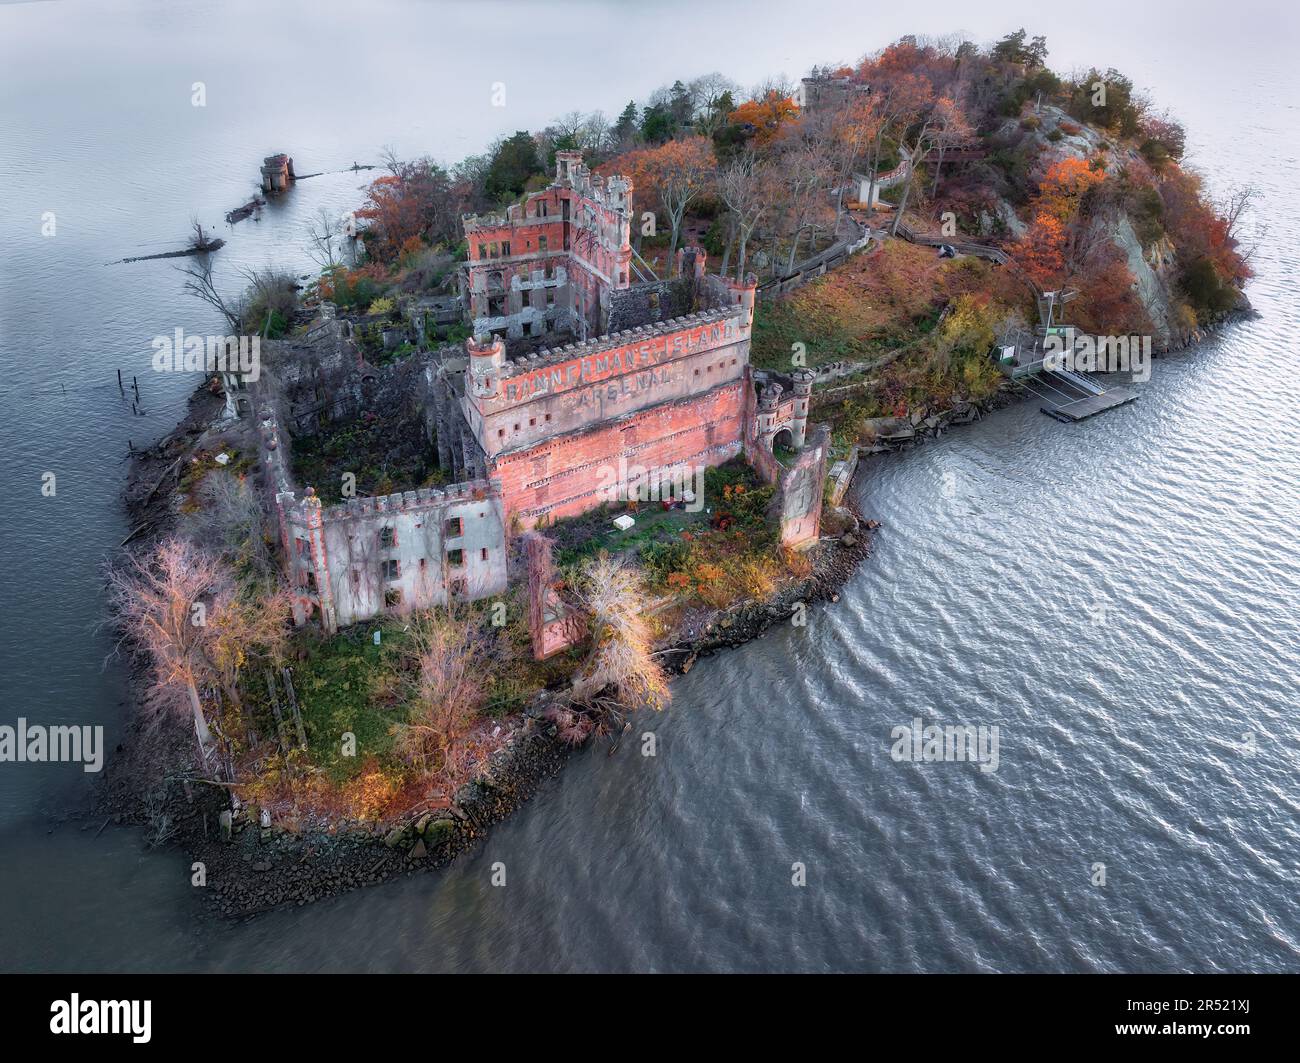 Bannerman Castle NY - Bannermans Island Arsenal is an abandoned military surplus warehouse located in a small and desolate island in the middle of the Stock Photo